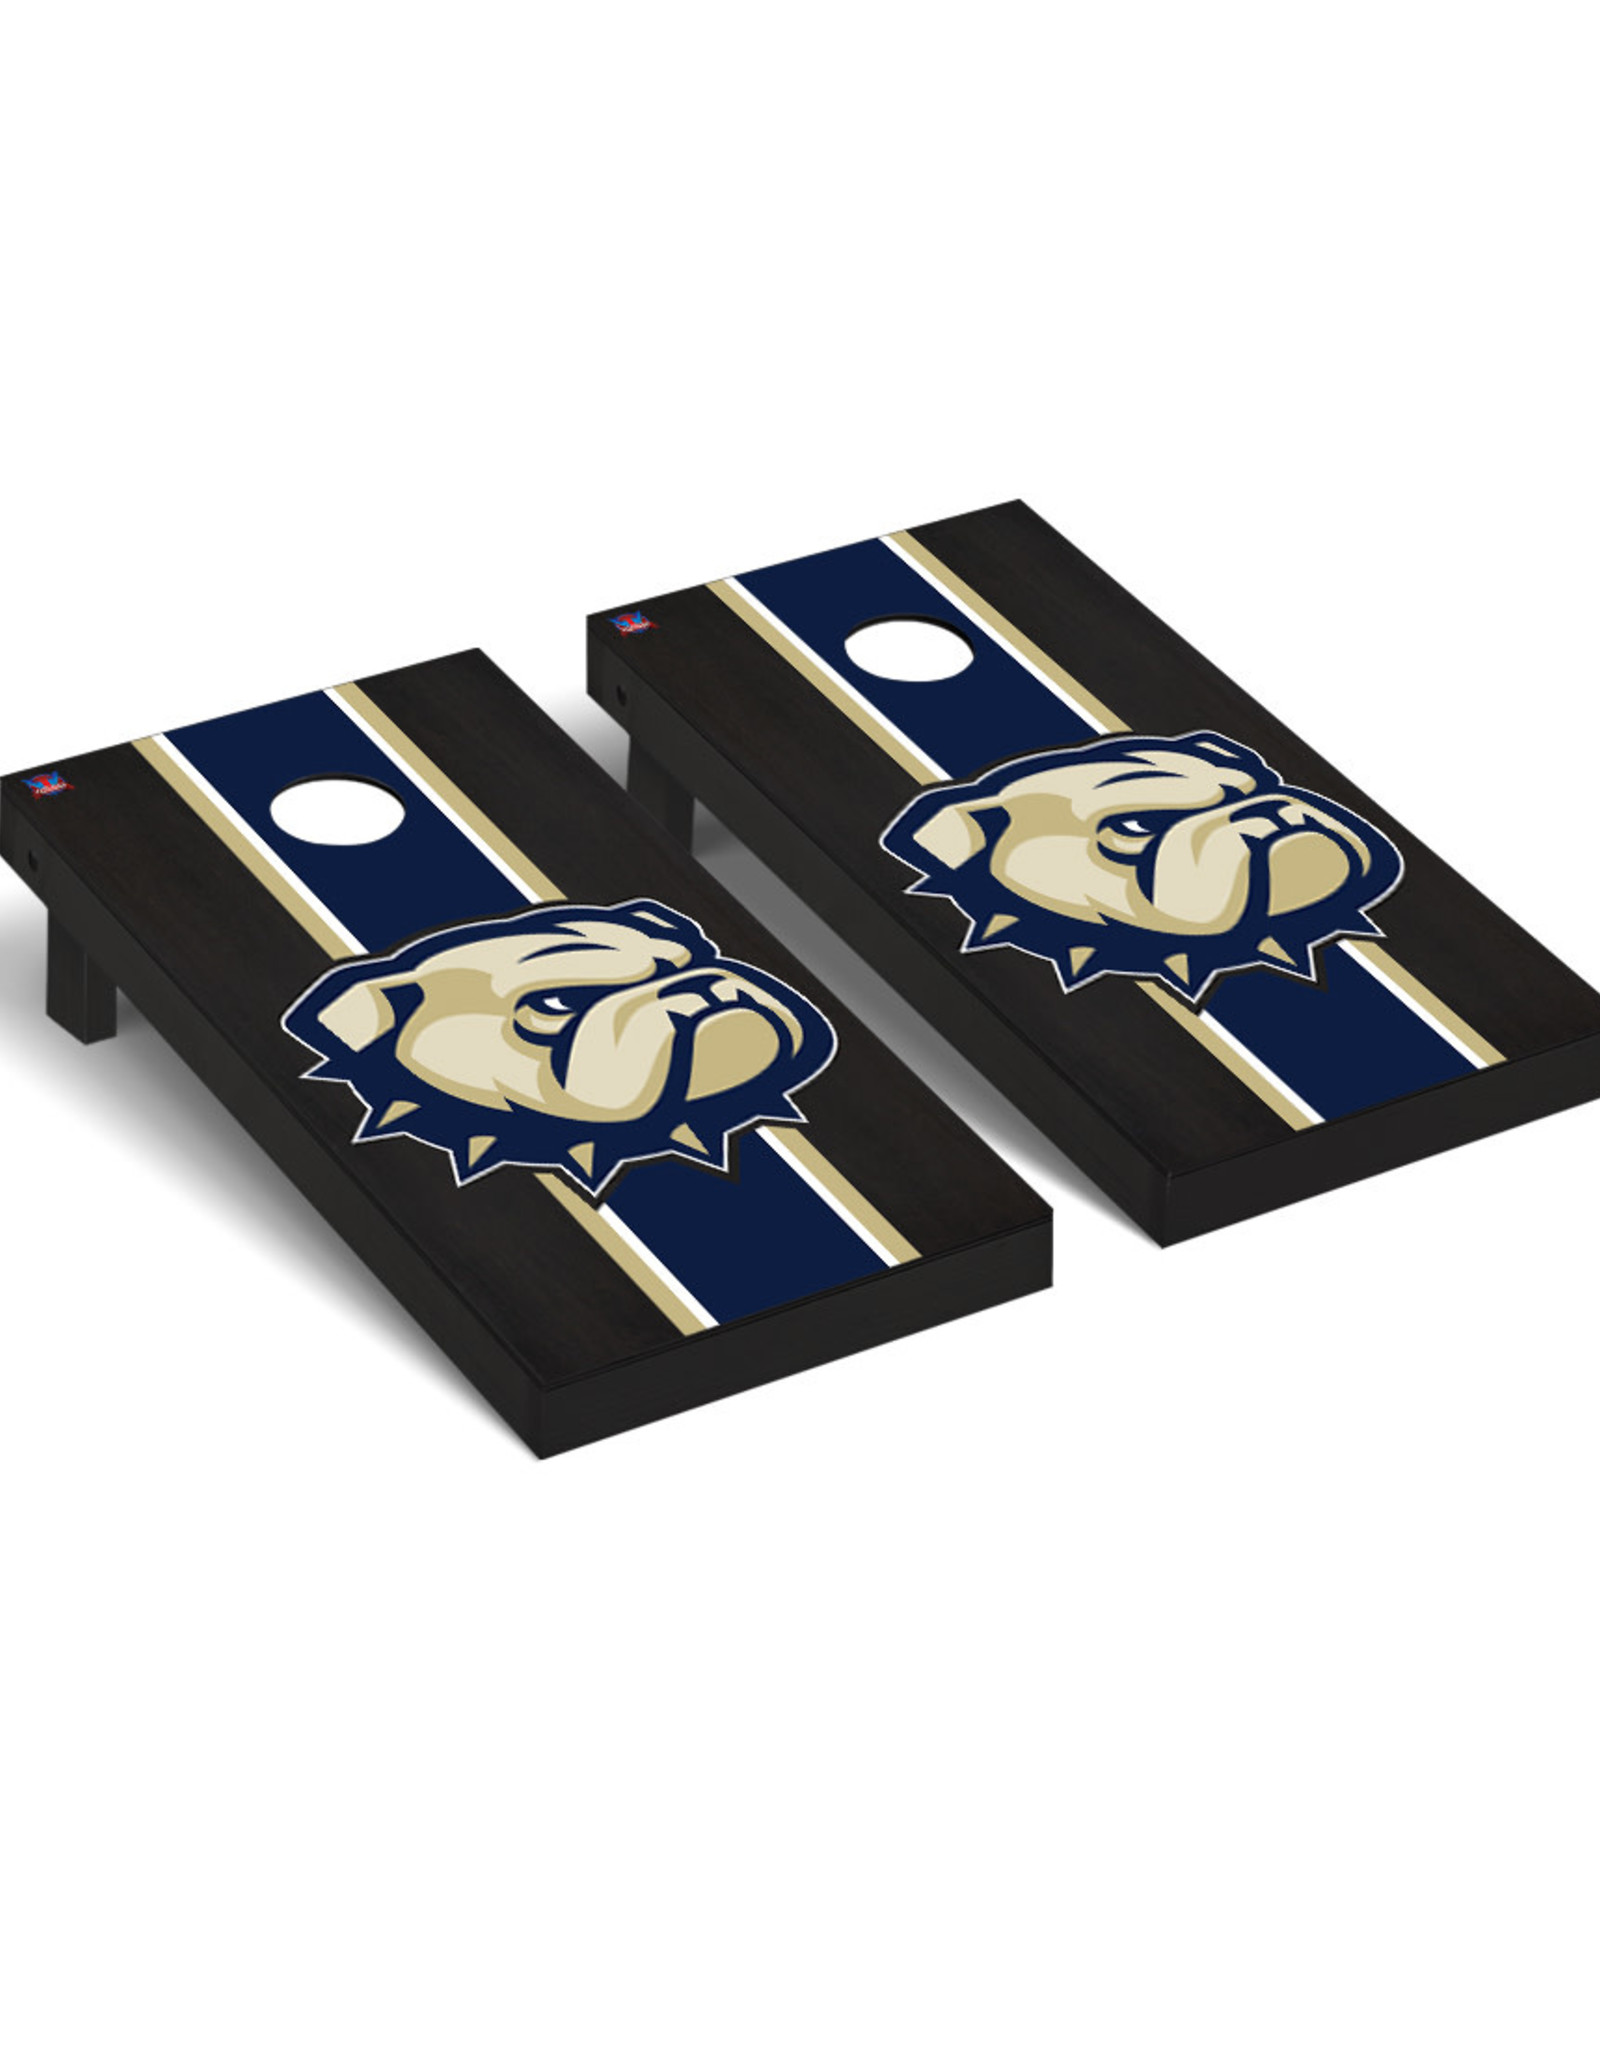 Victory Tailgate DROP SHIP ONLY Regulation Cornhole Game Set Onyx Stained Stripe Design (ONLINE ONLY)